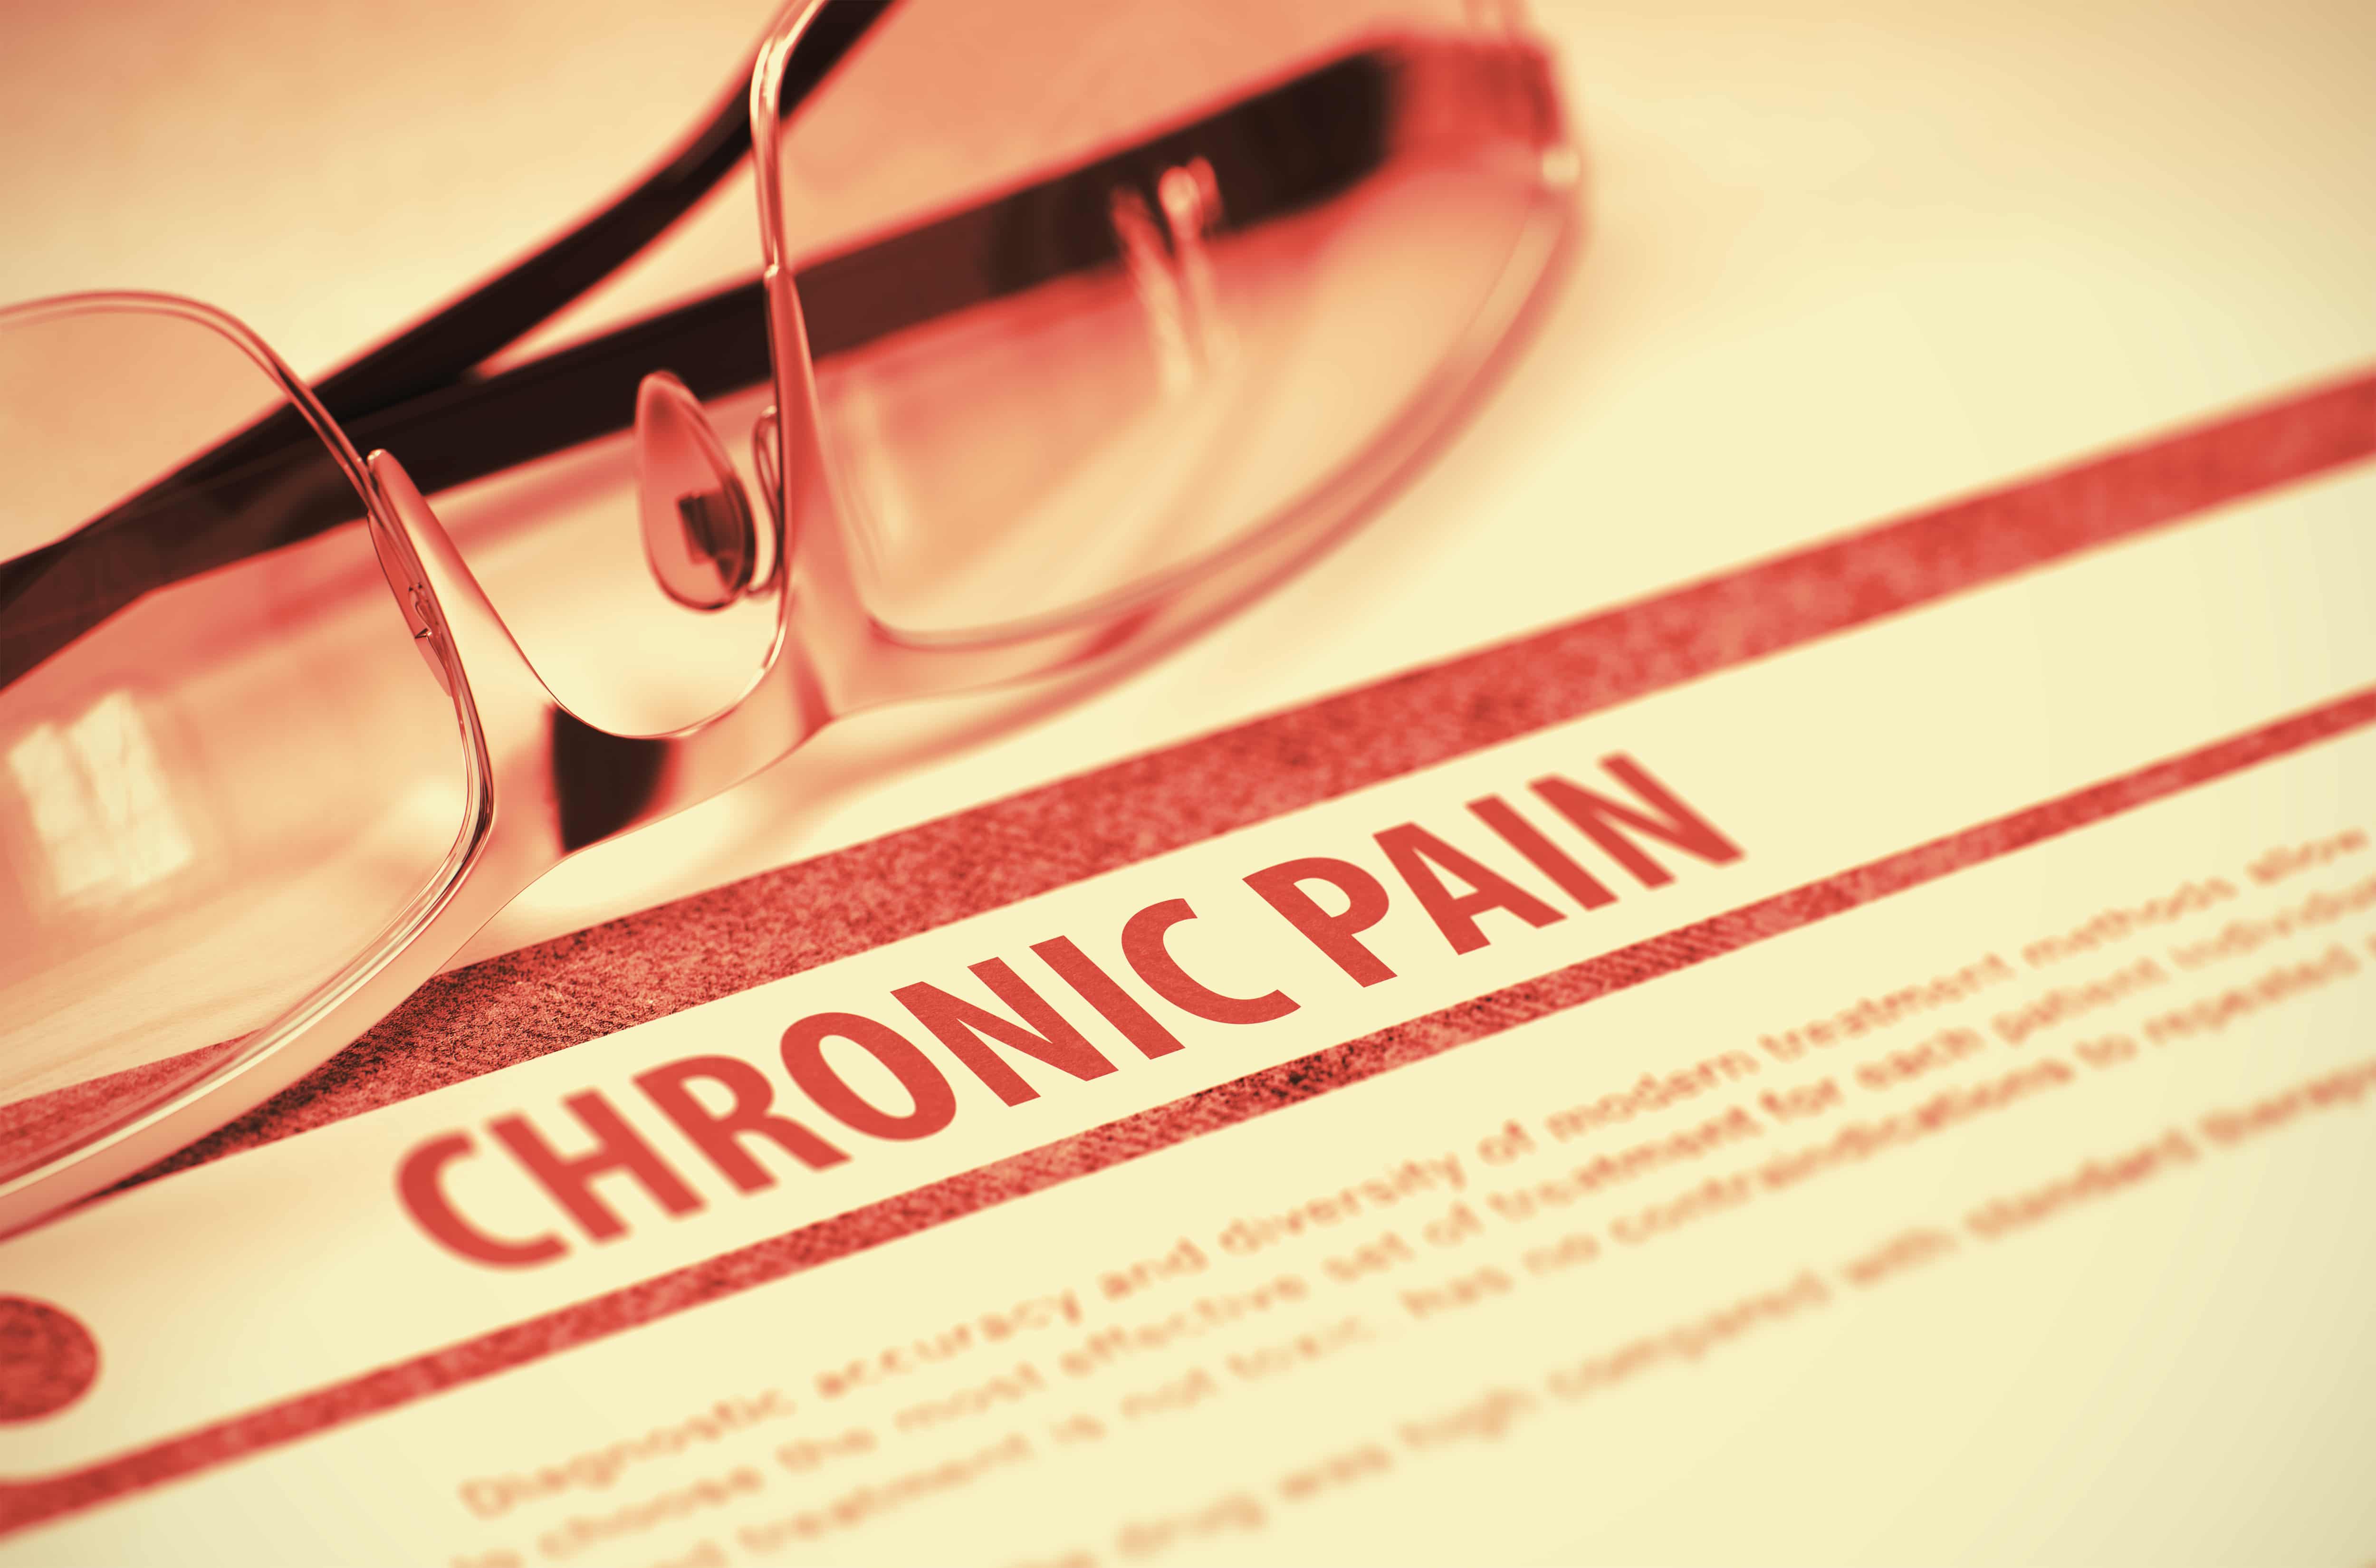 Chronic Pain and It’s Overlooked Aspects